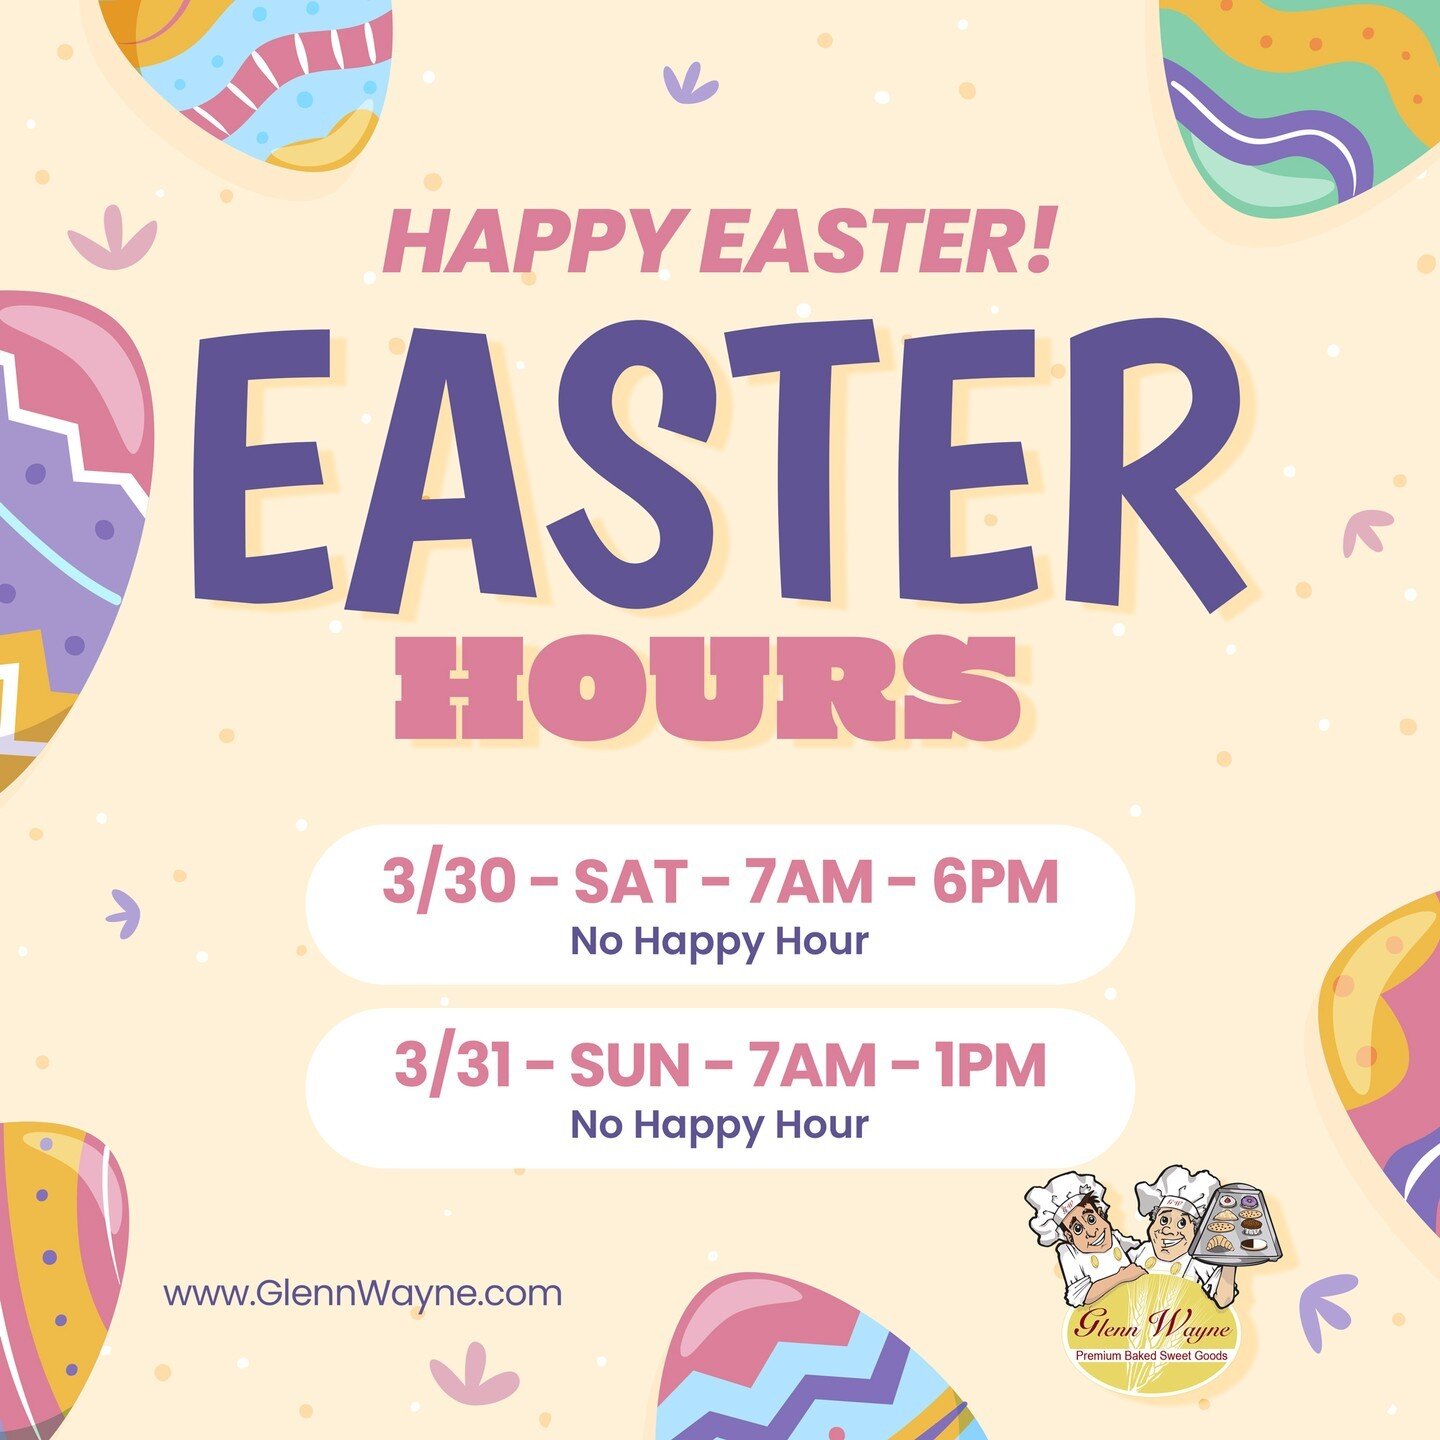 🐰🍩🎉 Happy Easter from Glenn Wayne Bakery!

𝓔𝓪𝓼𝓽𝓮𝓻 𝓗𝓸𝓾𝓻𝓼
Saturday, March 30th: 7 AM - 6 PM (no happy hour)
Easter Sunday, March 31st: 7 AM - 1 PM (no happy hour)

📍 Bohemia, NY
📞 631-256-5140
📞 631-319-6266
🌐 www.GlennWayne.com

#Hap